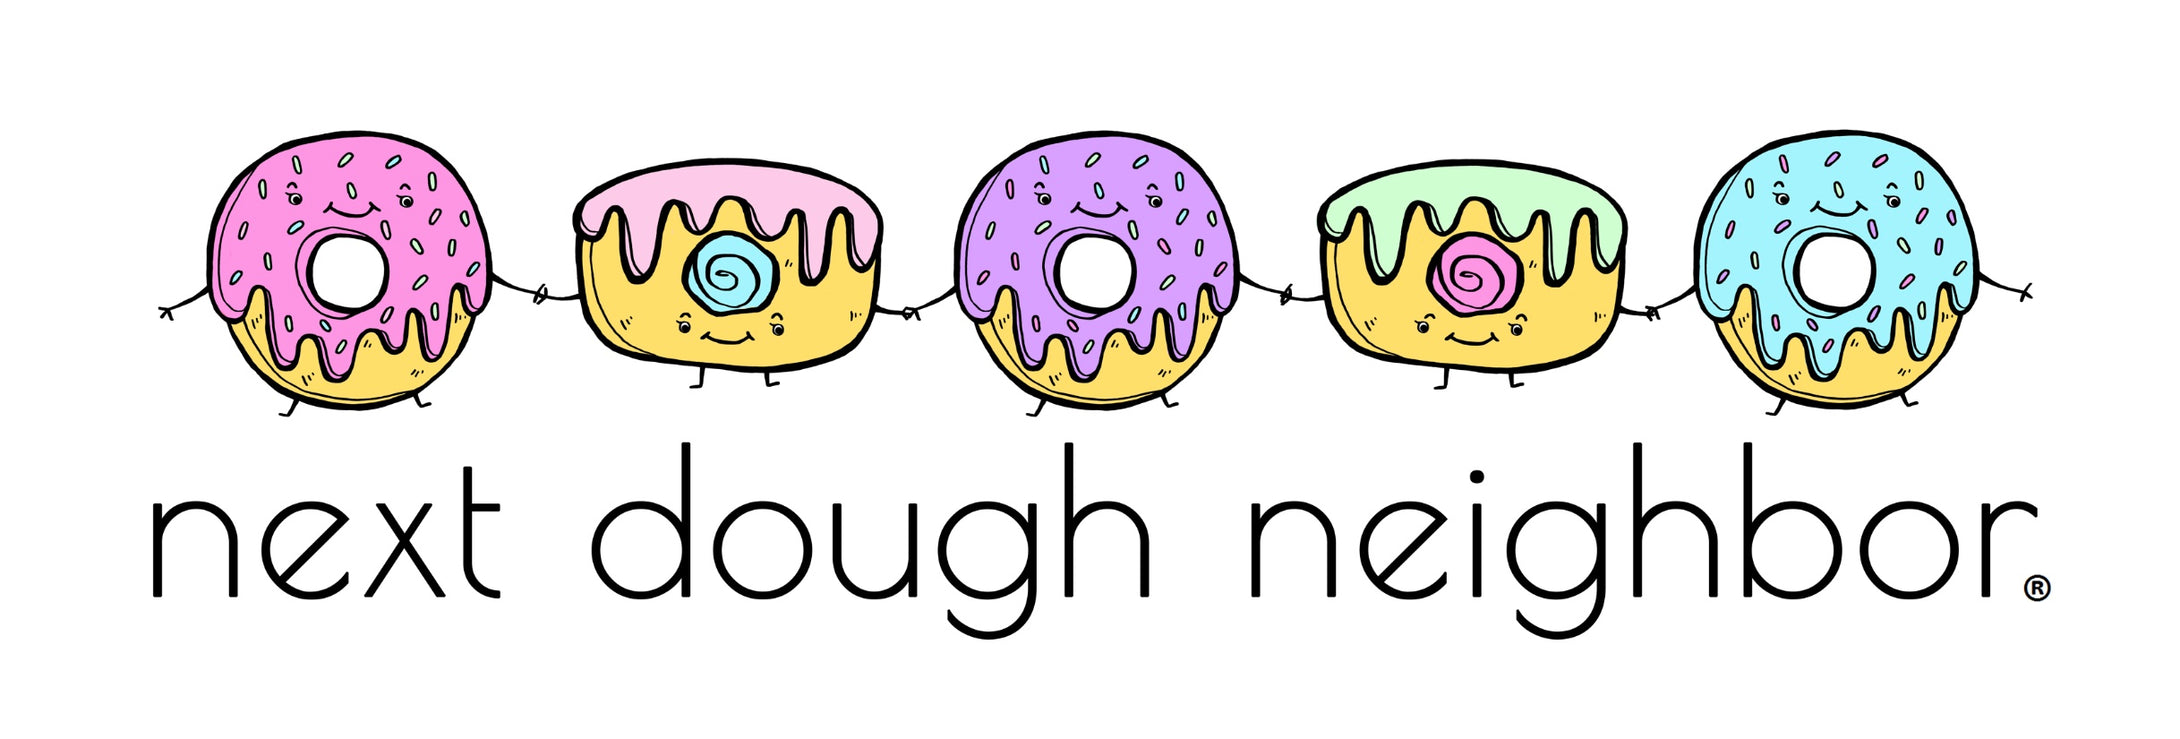 Donut neighbors holding hands, standing on top of the title "Next Dough Neighbor"."